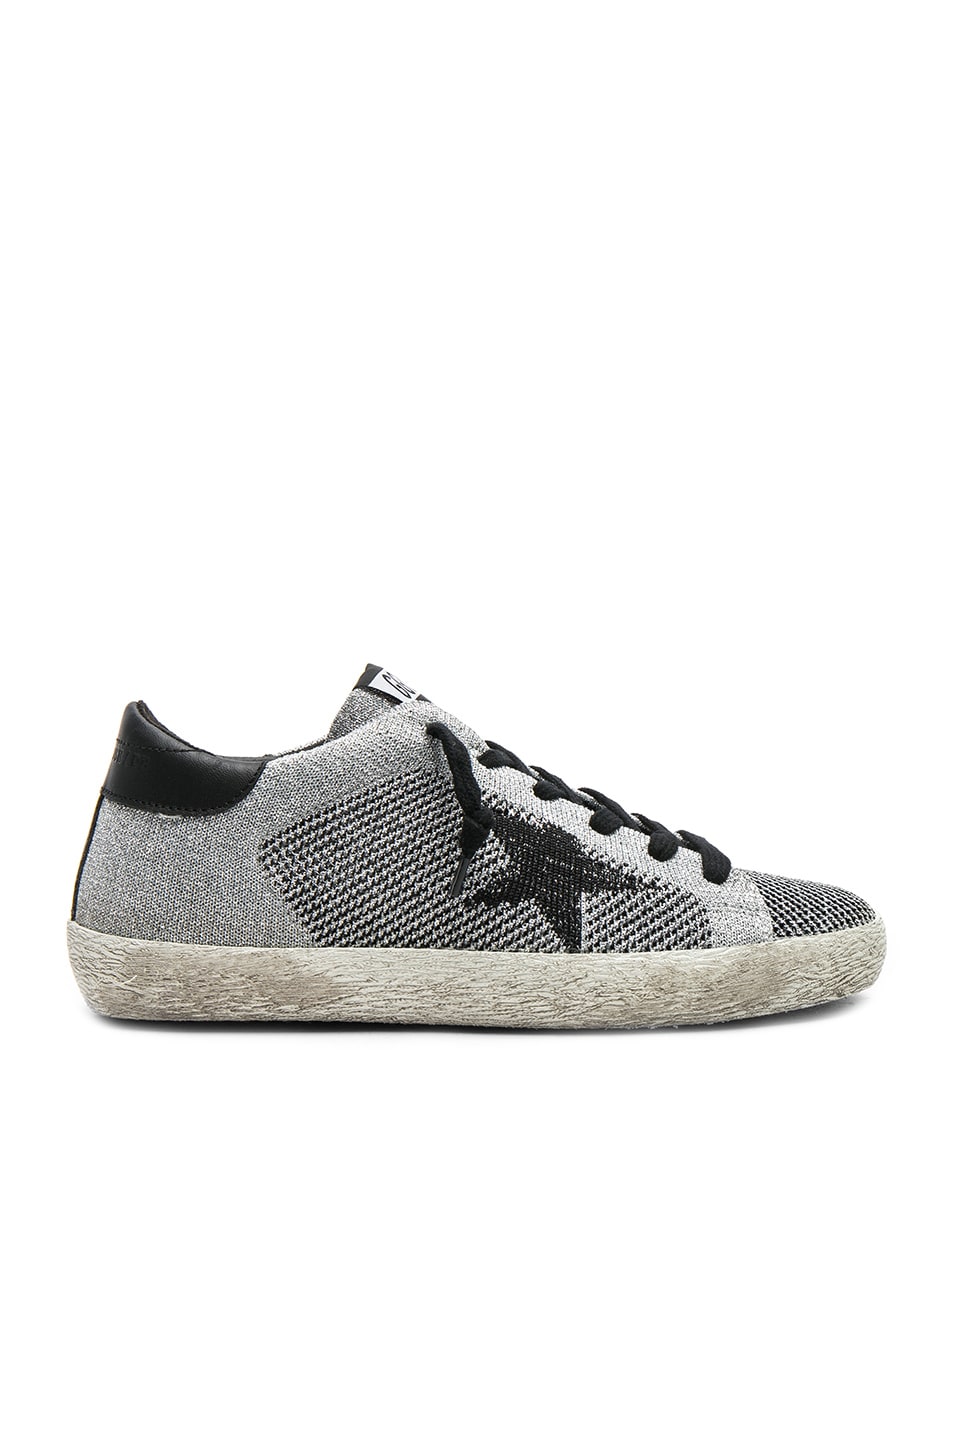 Image 1 of Golden Goose Knit Superstar Sneakers in Silver